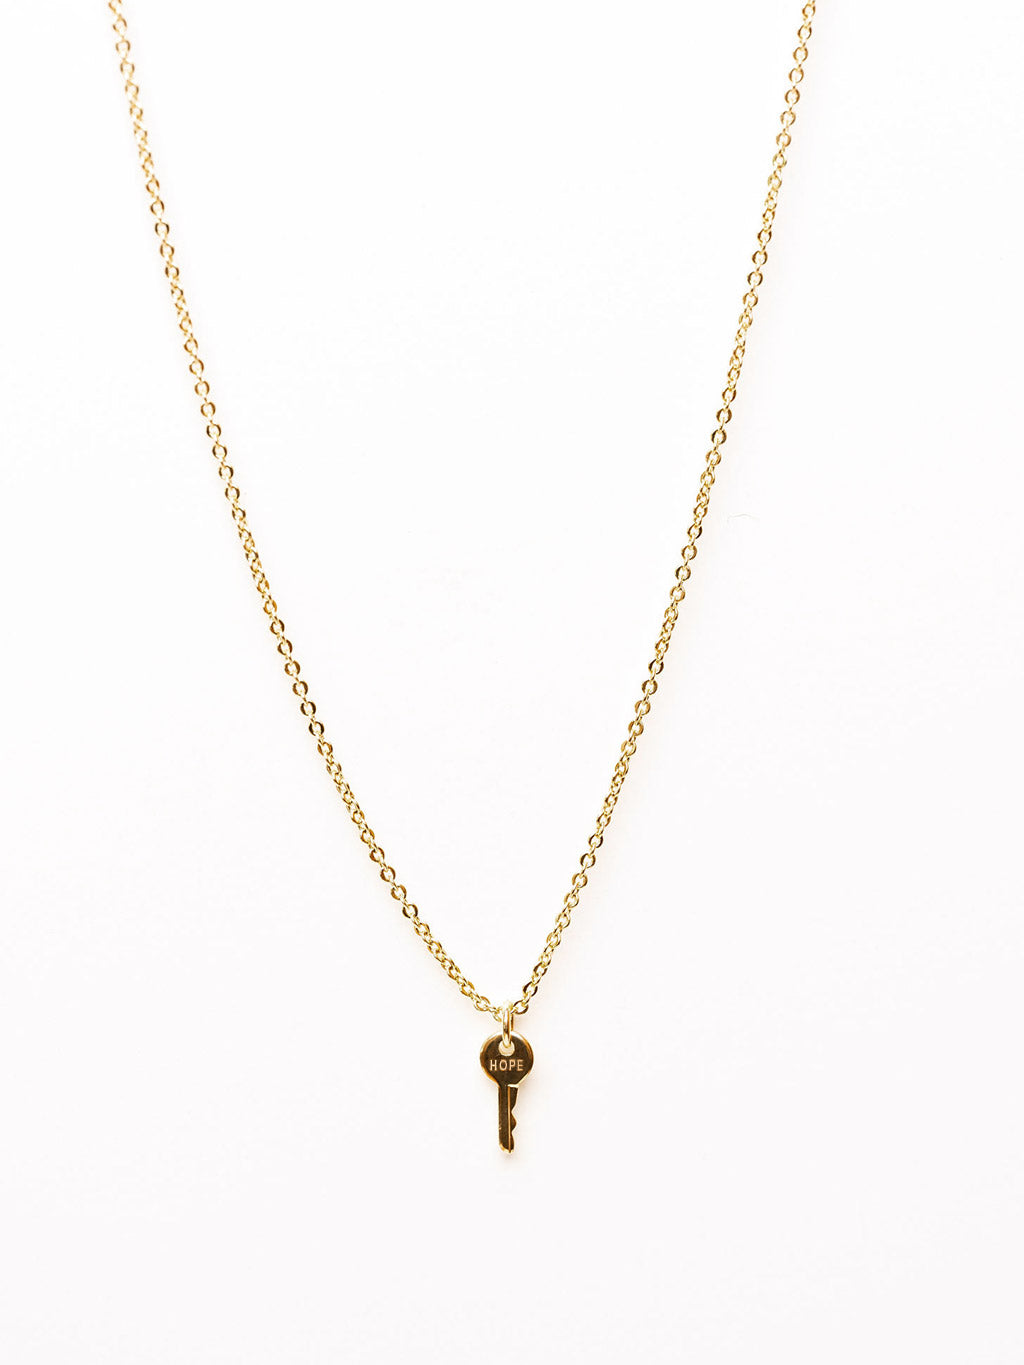 Mini Key Necklace Necklaces The Giving Keys HOPE Gold 